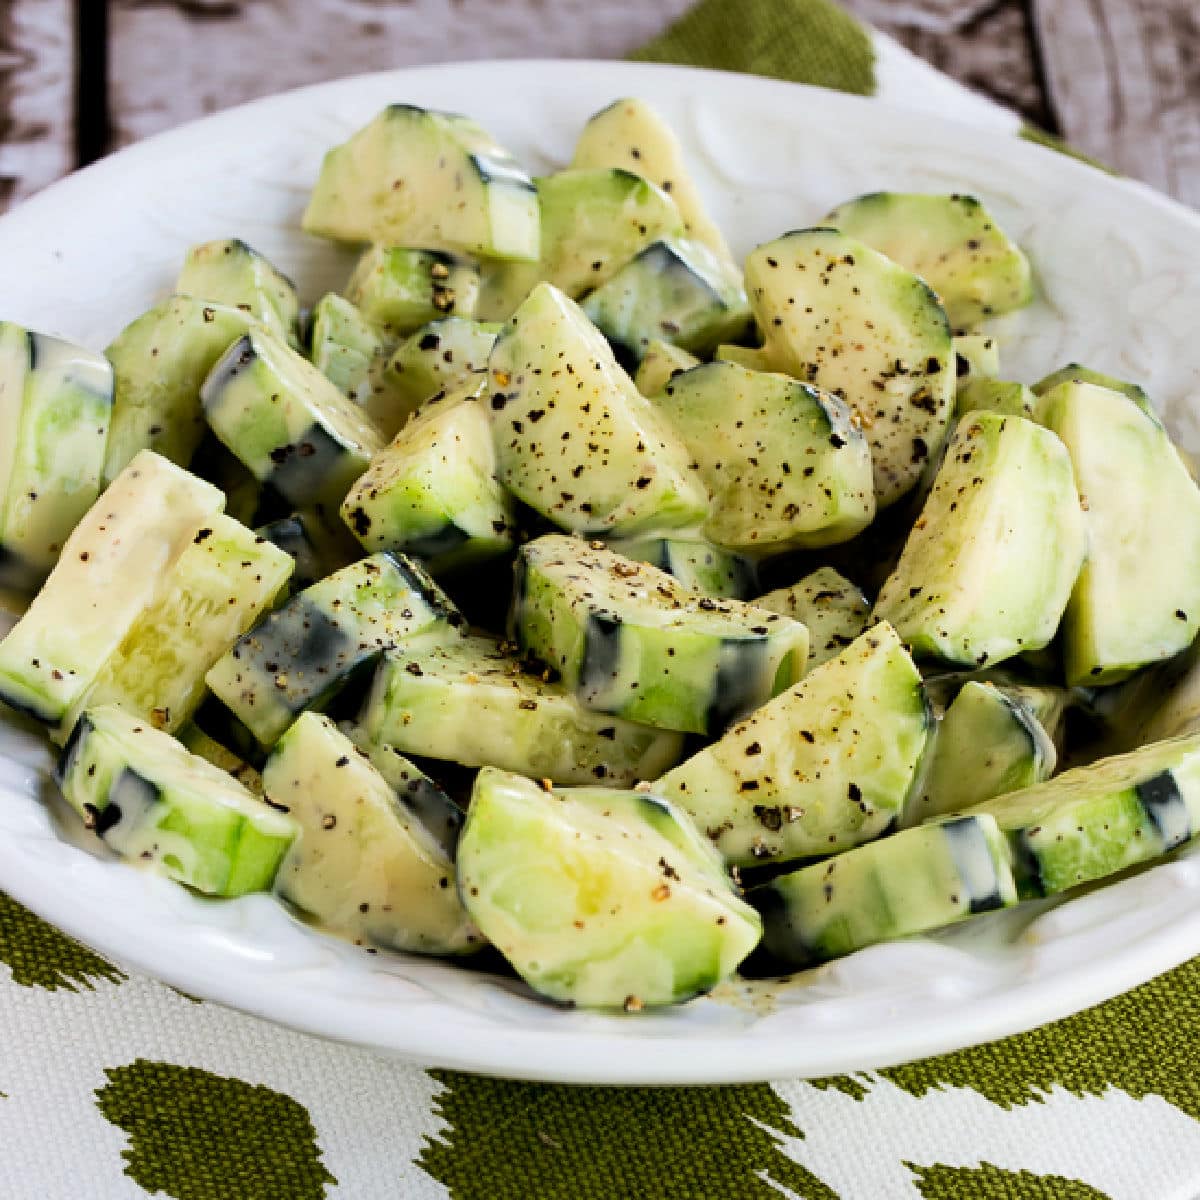 Square image for Cucumbers Caesar shown in salad bowl.